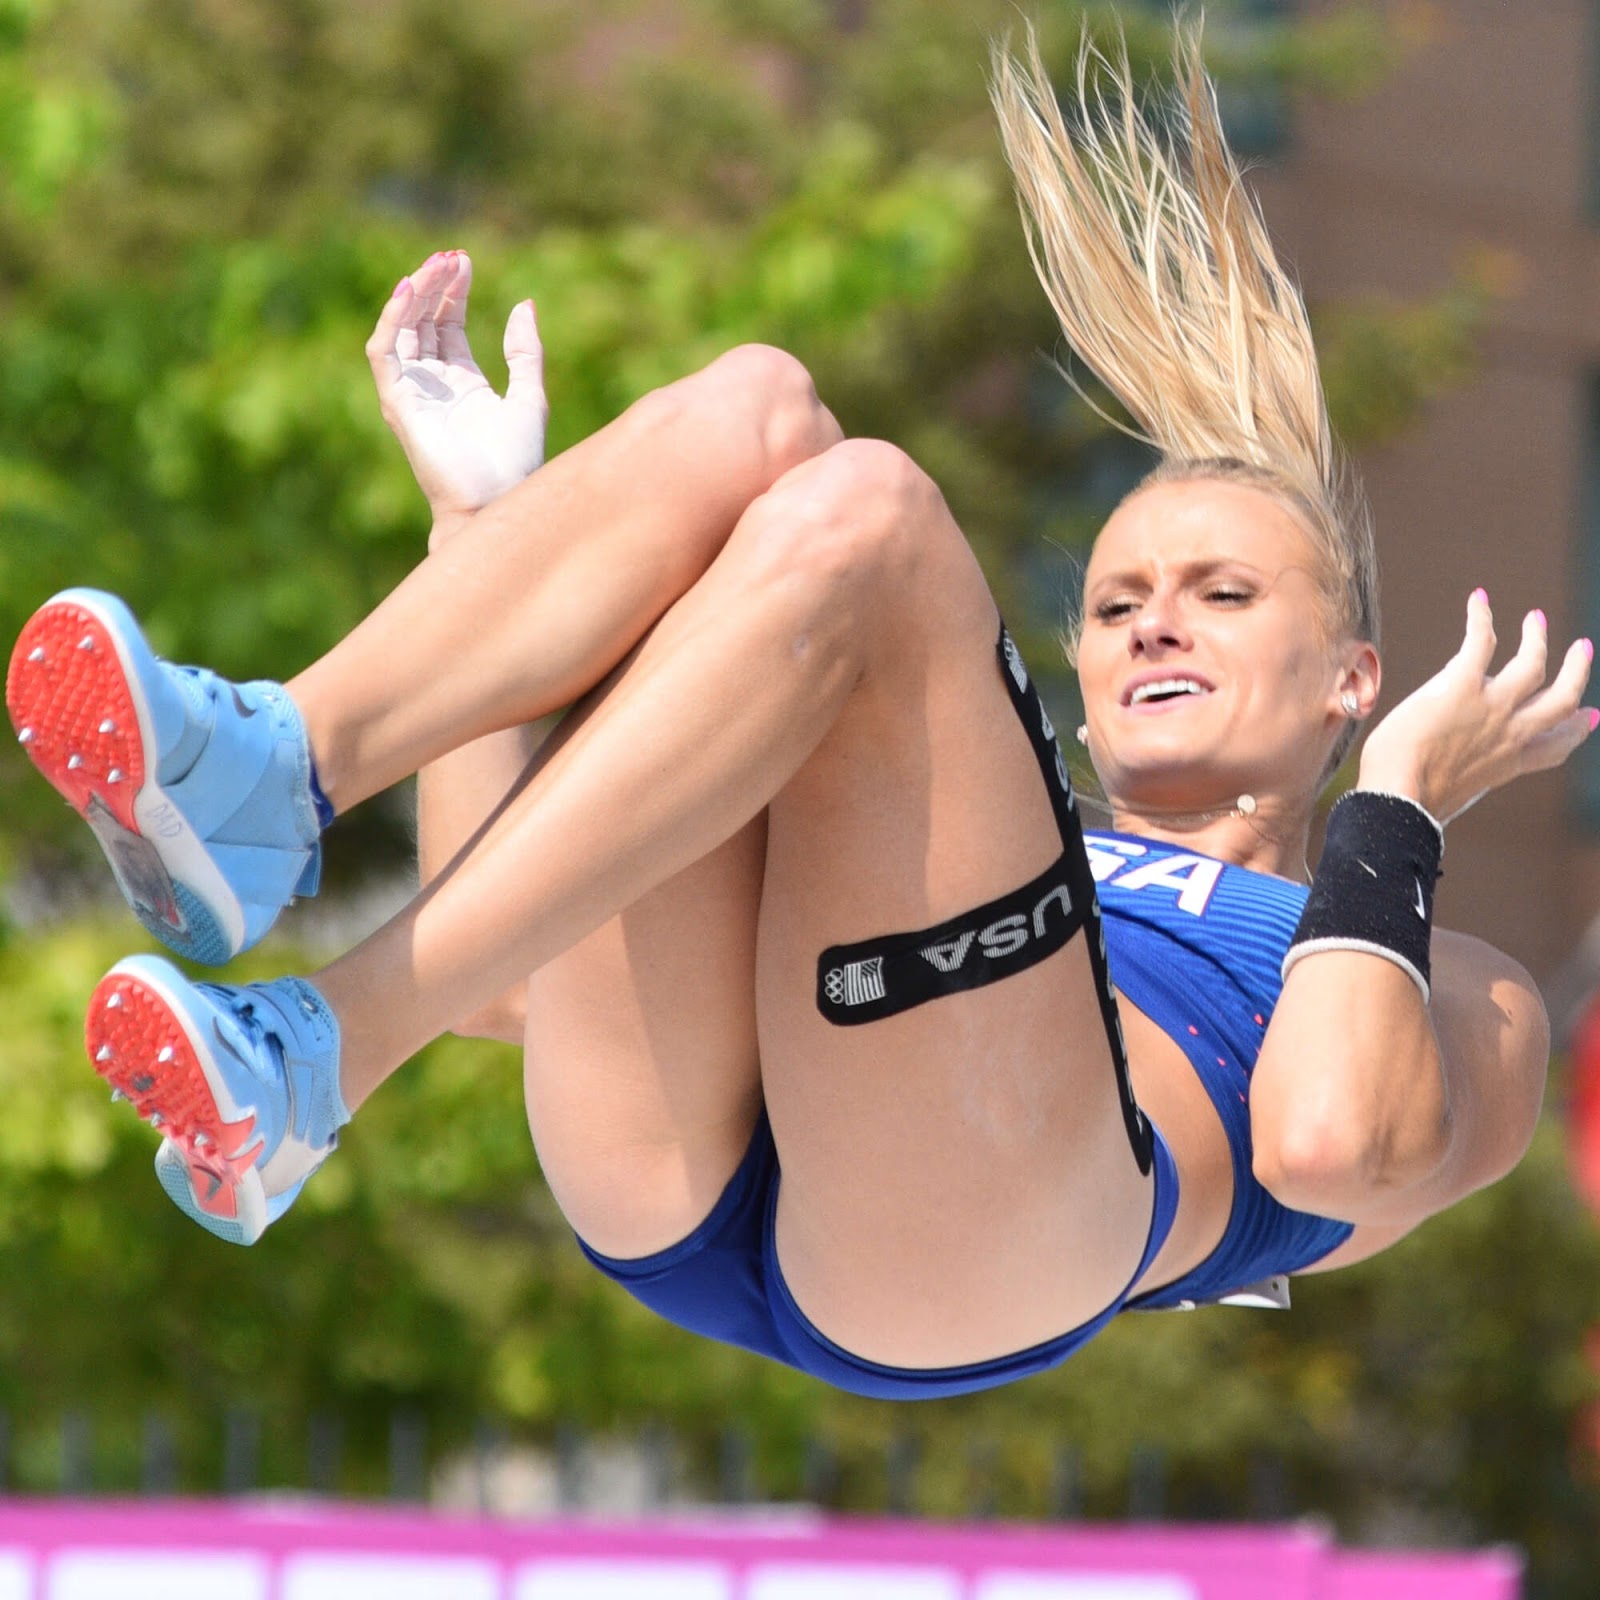 Nageotte posts 2020 world leading mark in pole vault; Pop-up distance meet in Portland this weekend? pic